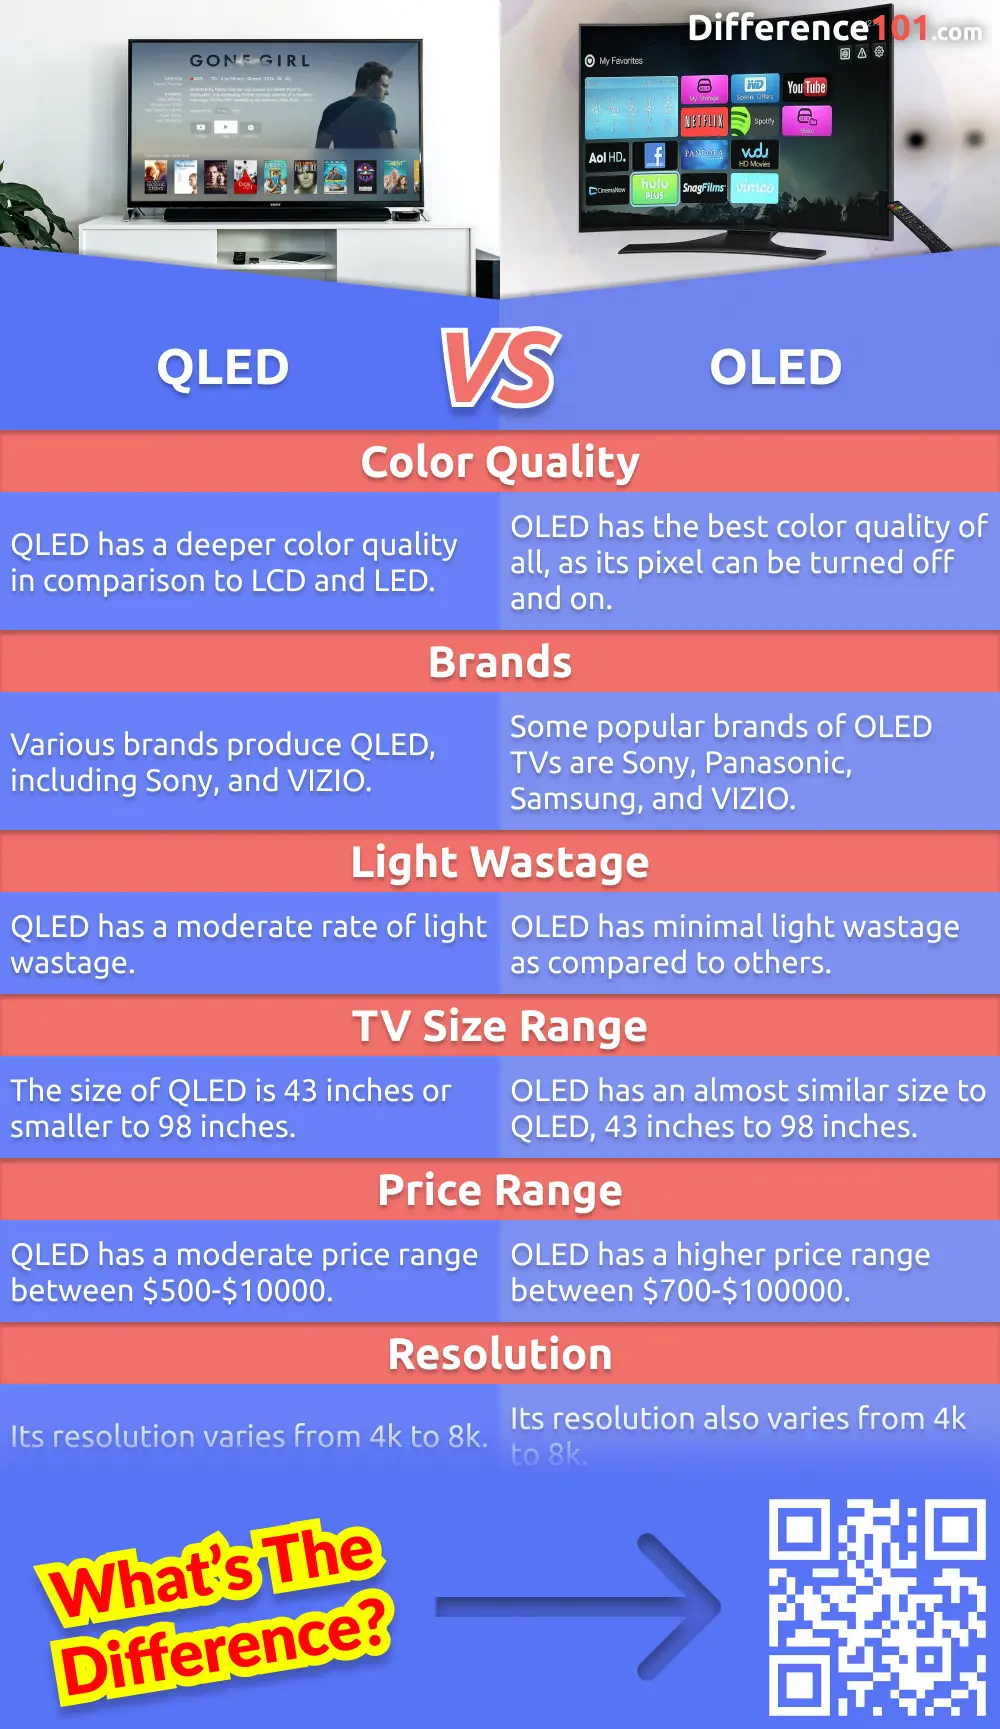 Neo QLED vs. OLED: What's the Difference?